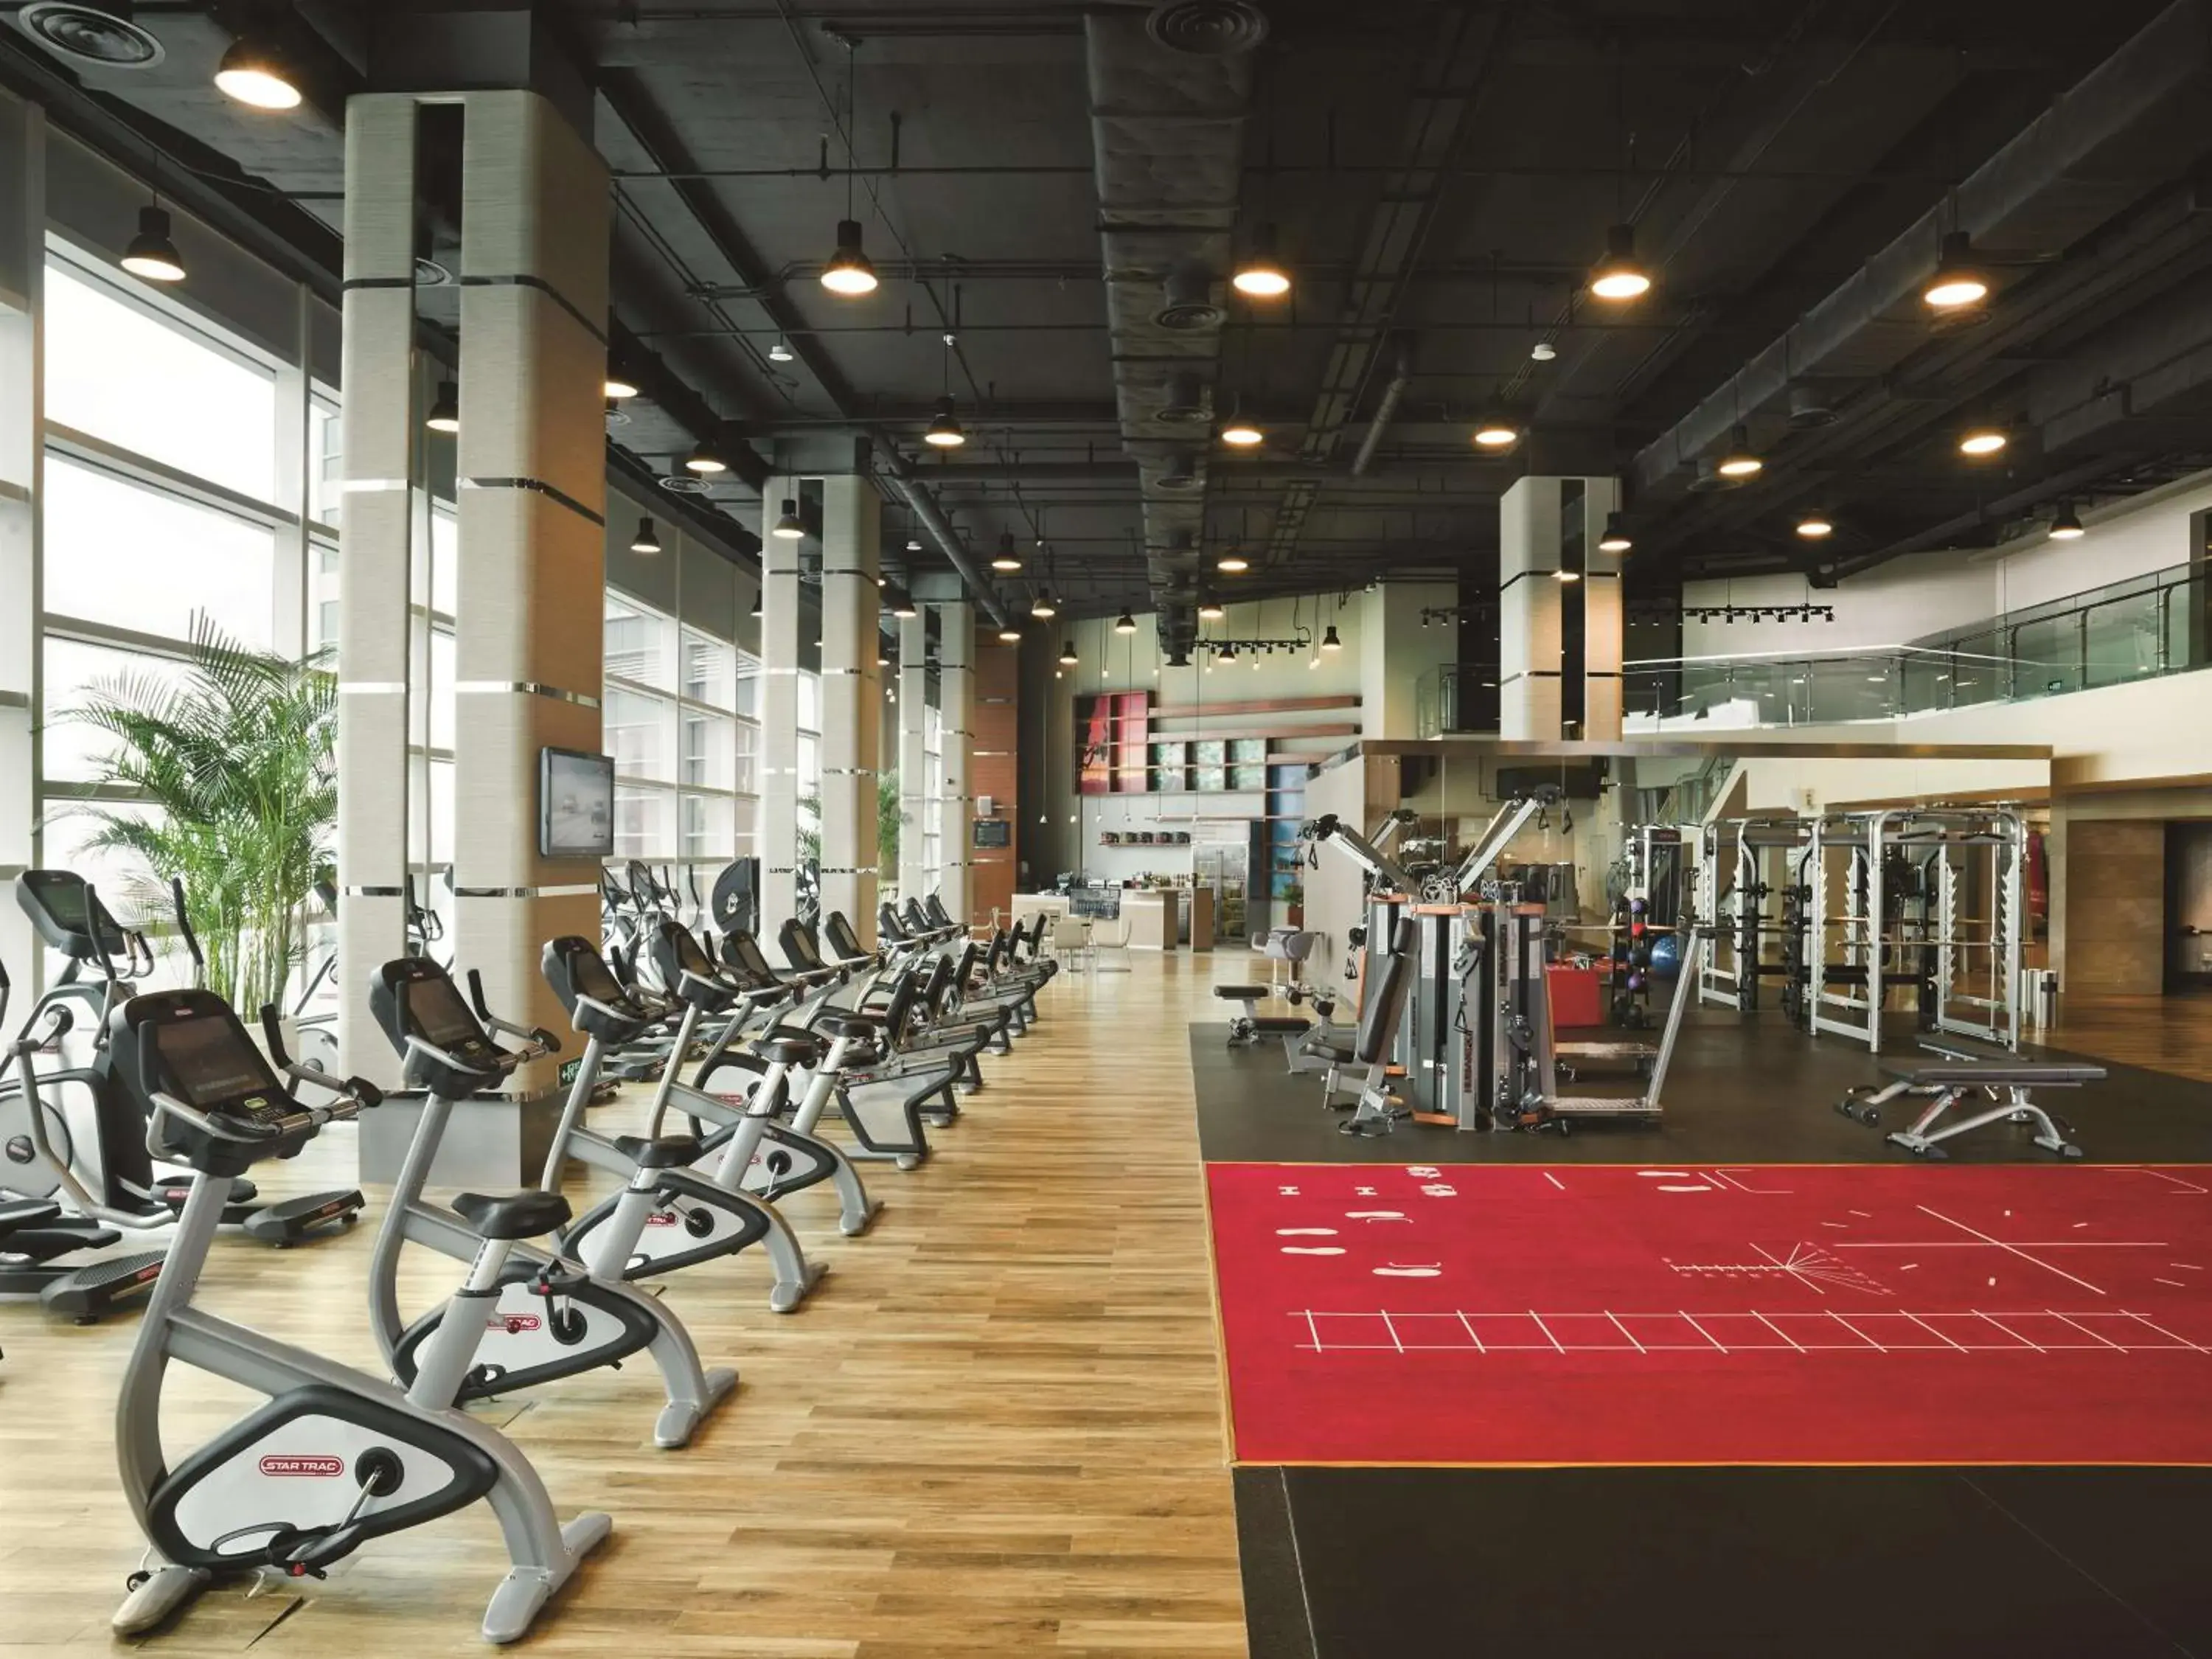 Fitness centre/facilities, Fitness Center/Facilities in Kerry Hotel Pudong, Shanghai